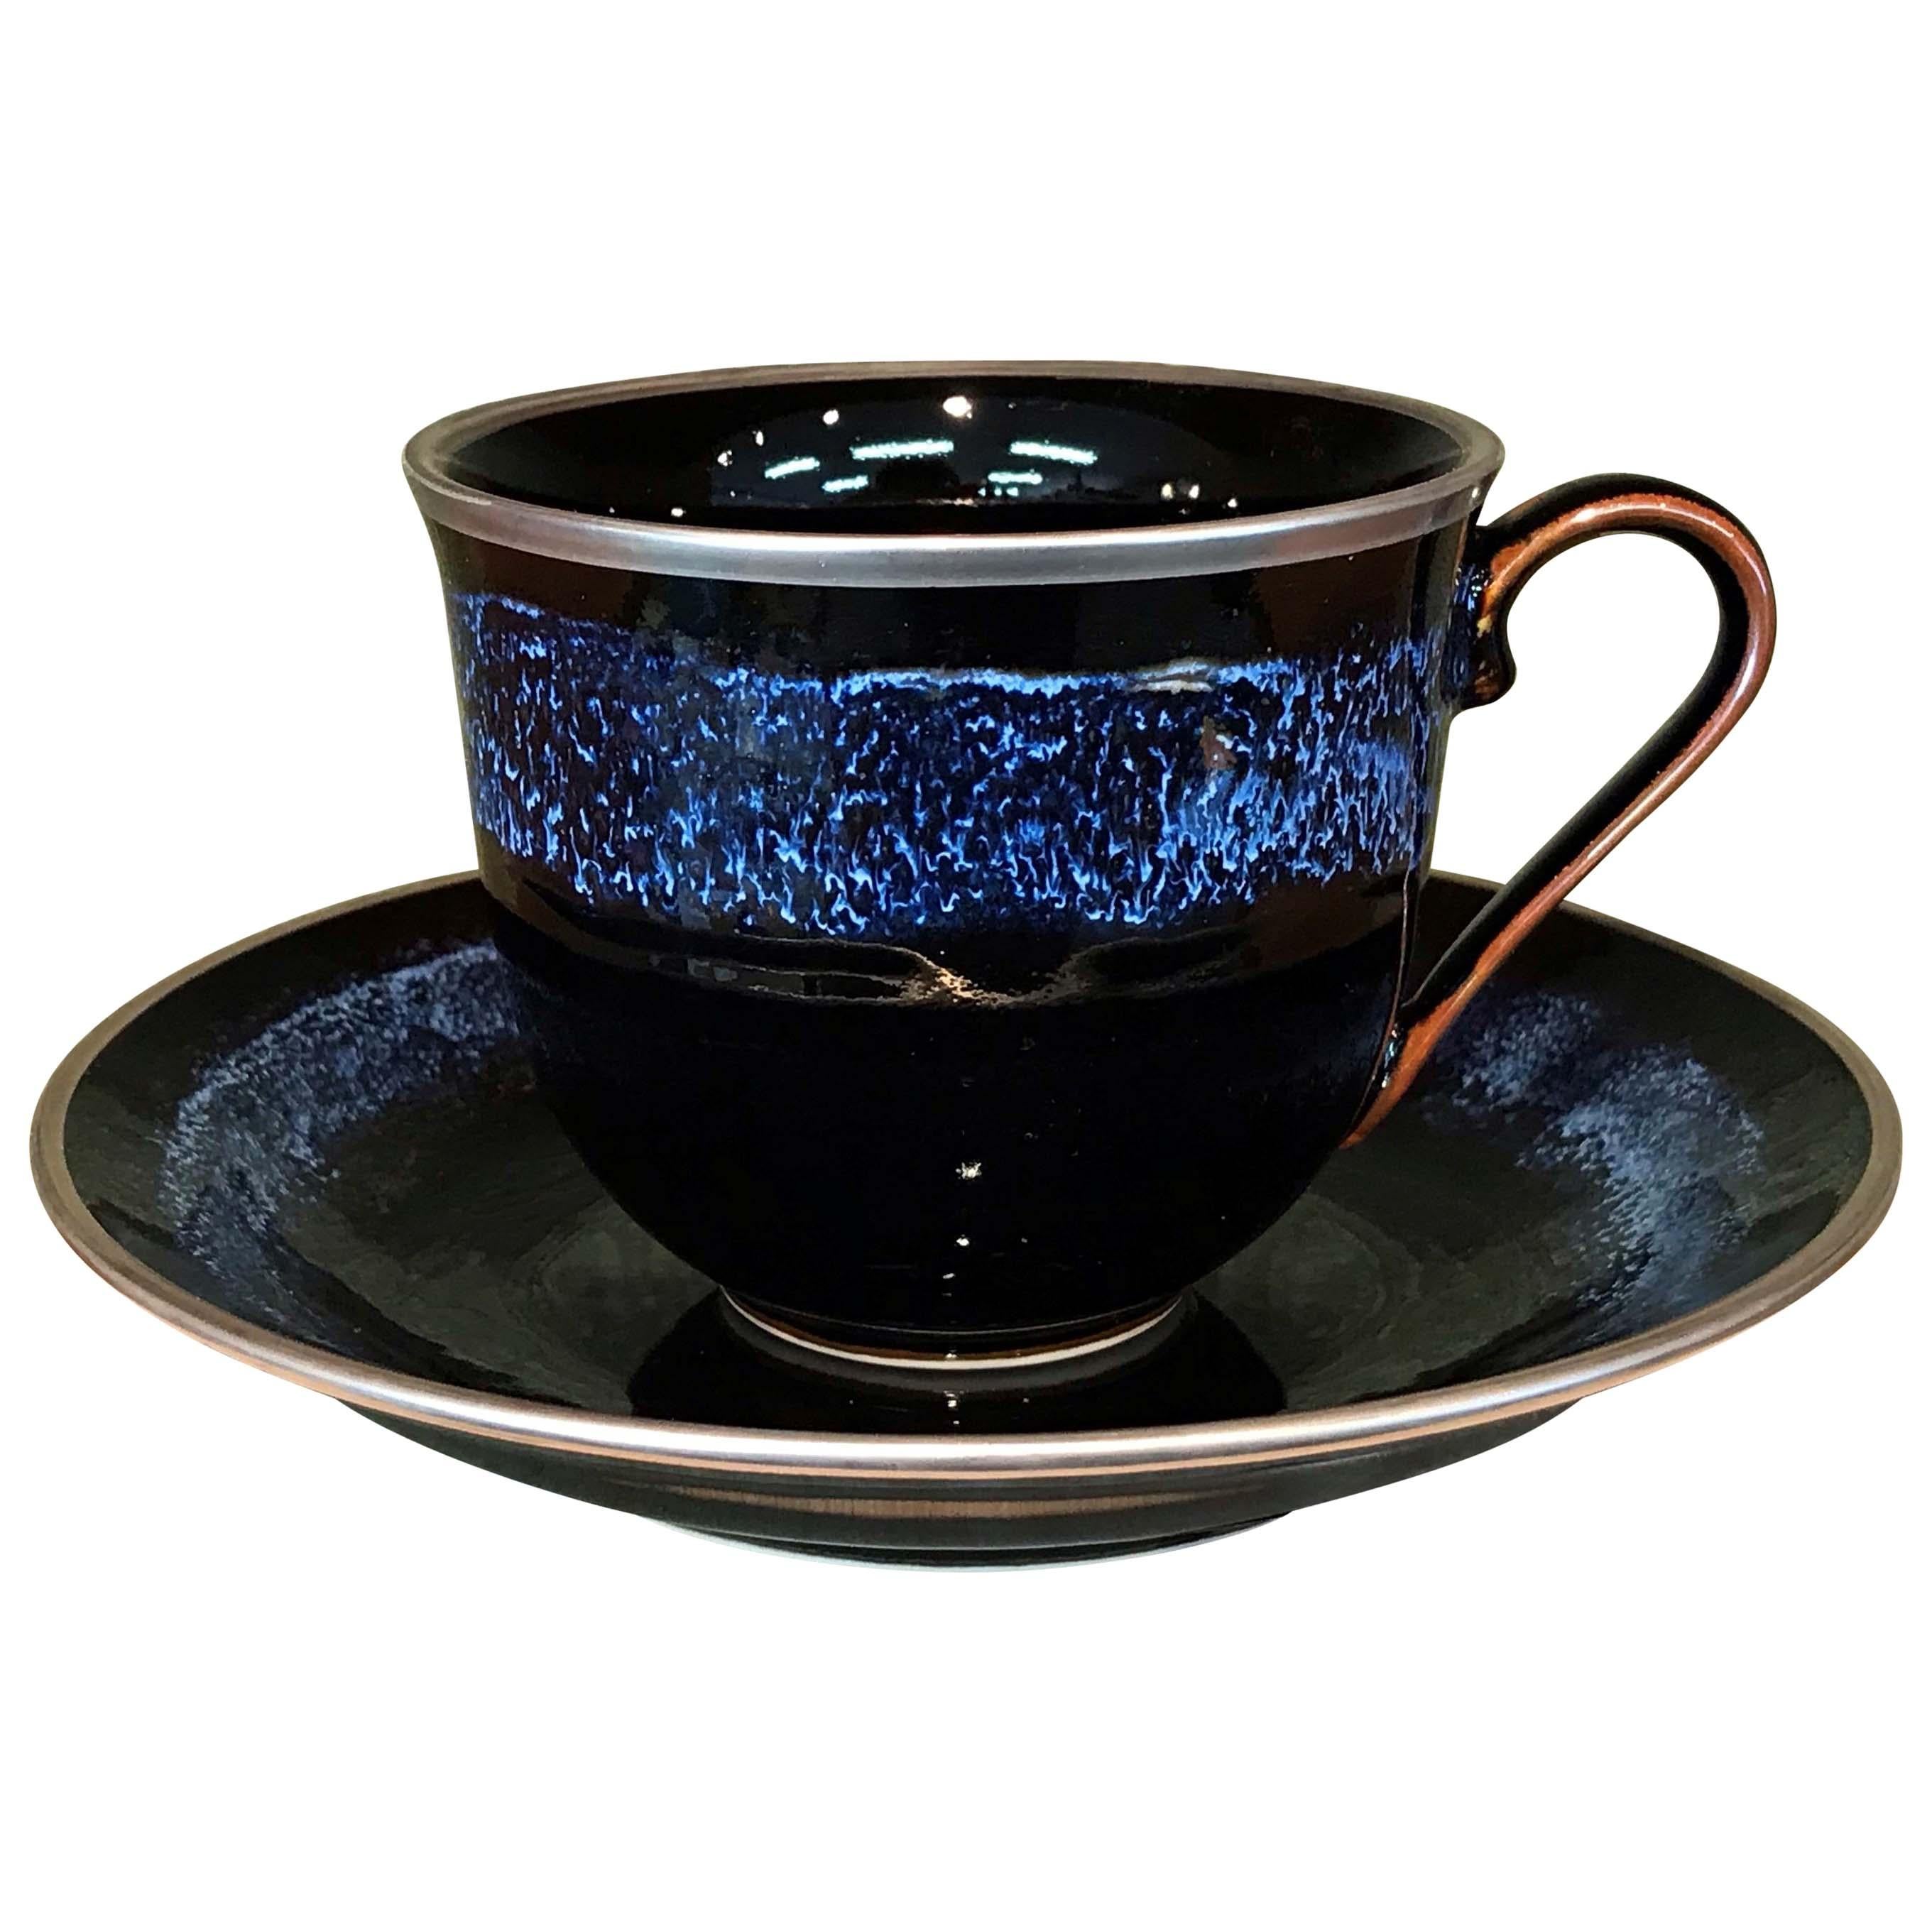 Japanese Hand-Glazed Black Porcelain Cup & Saucer by Contemporary Master Artist